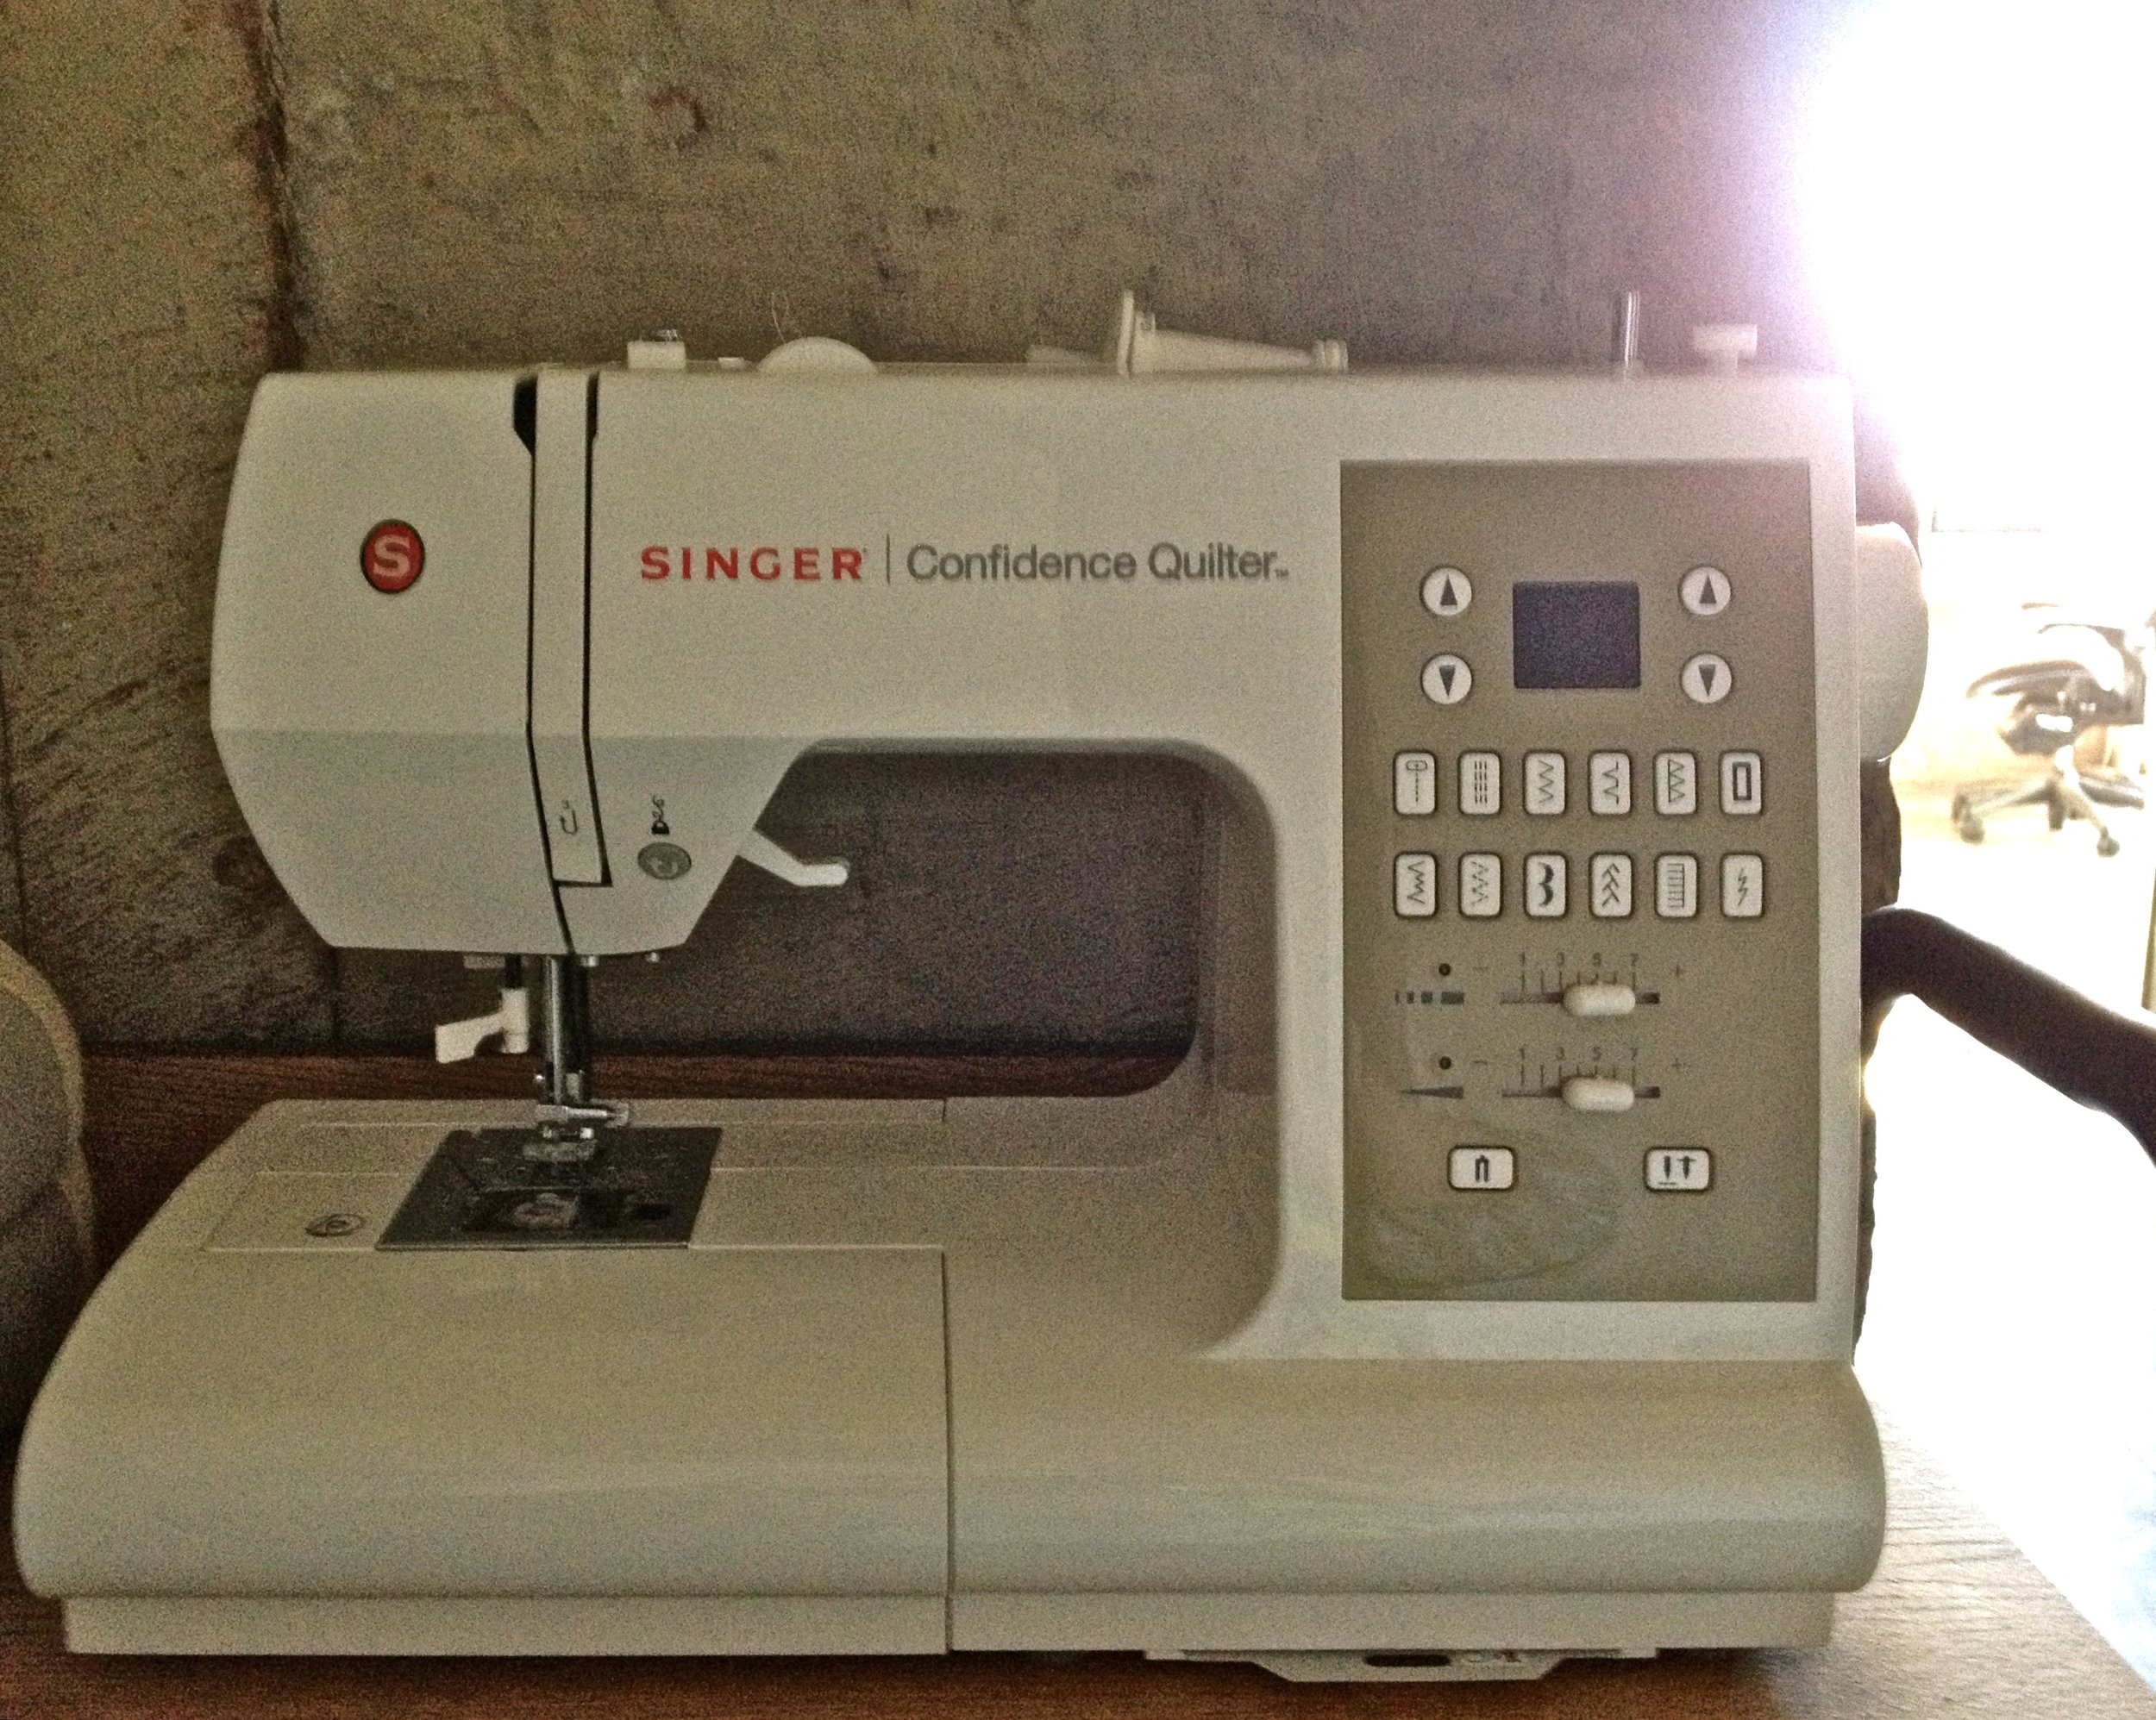 Best Serger Sewing Machine in 2020: Singer, Janome, and More